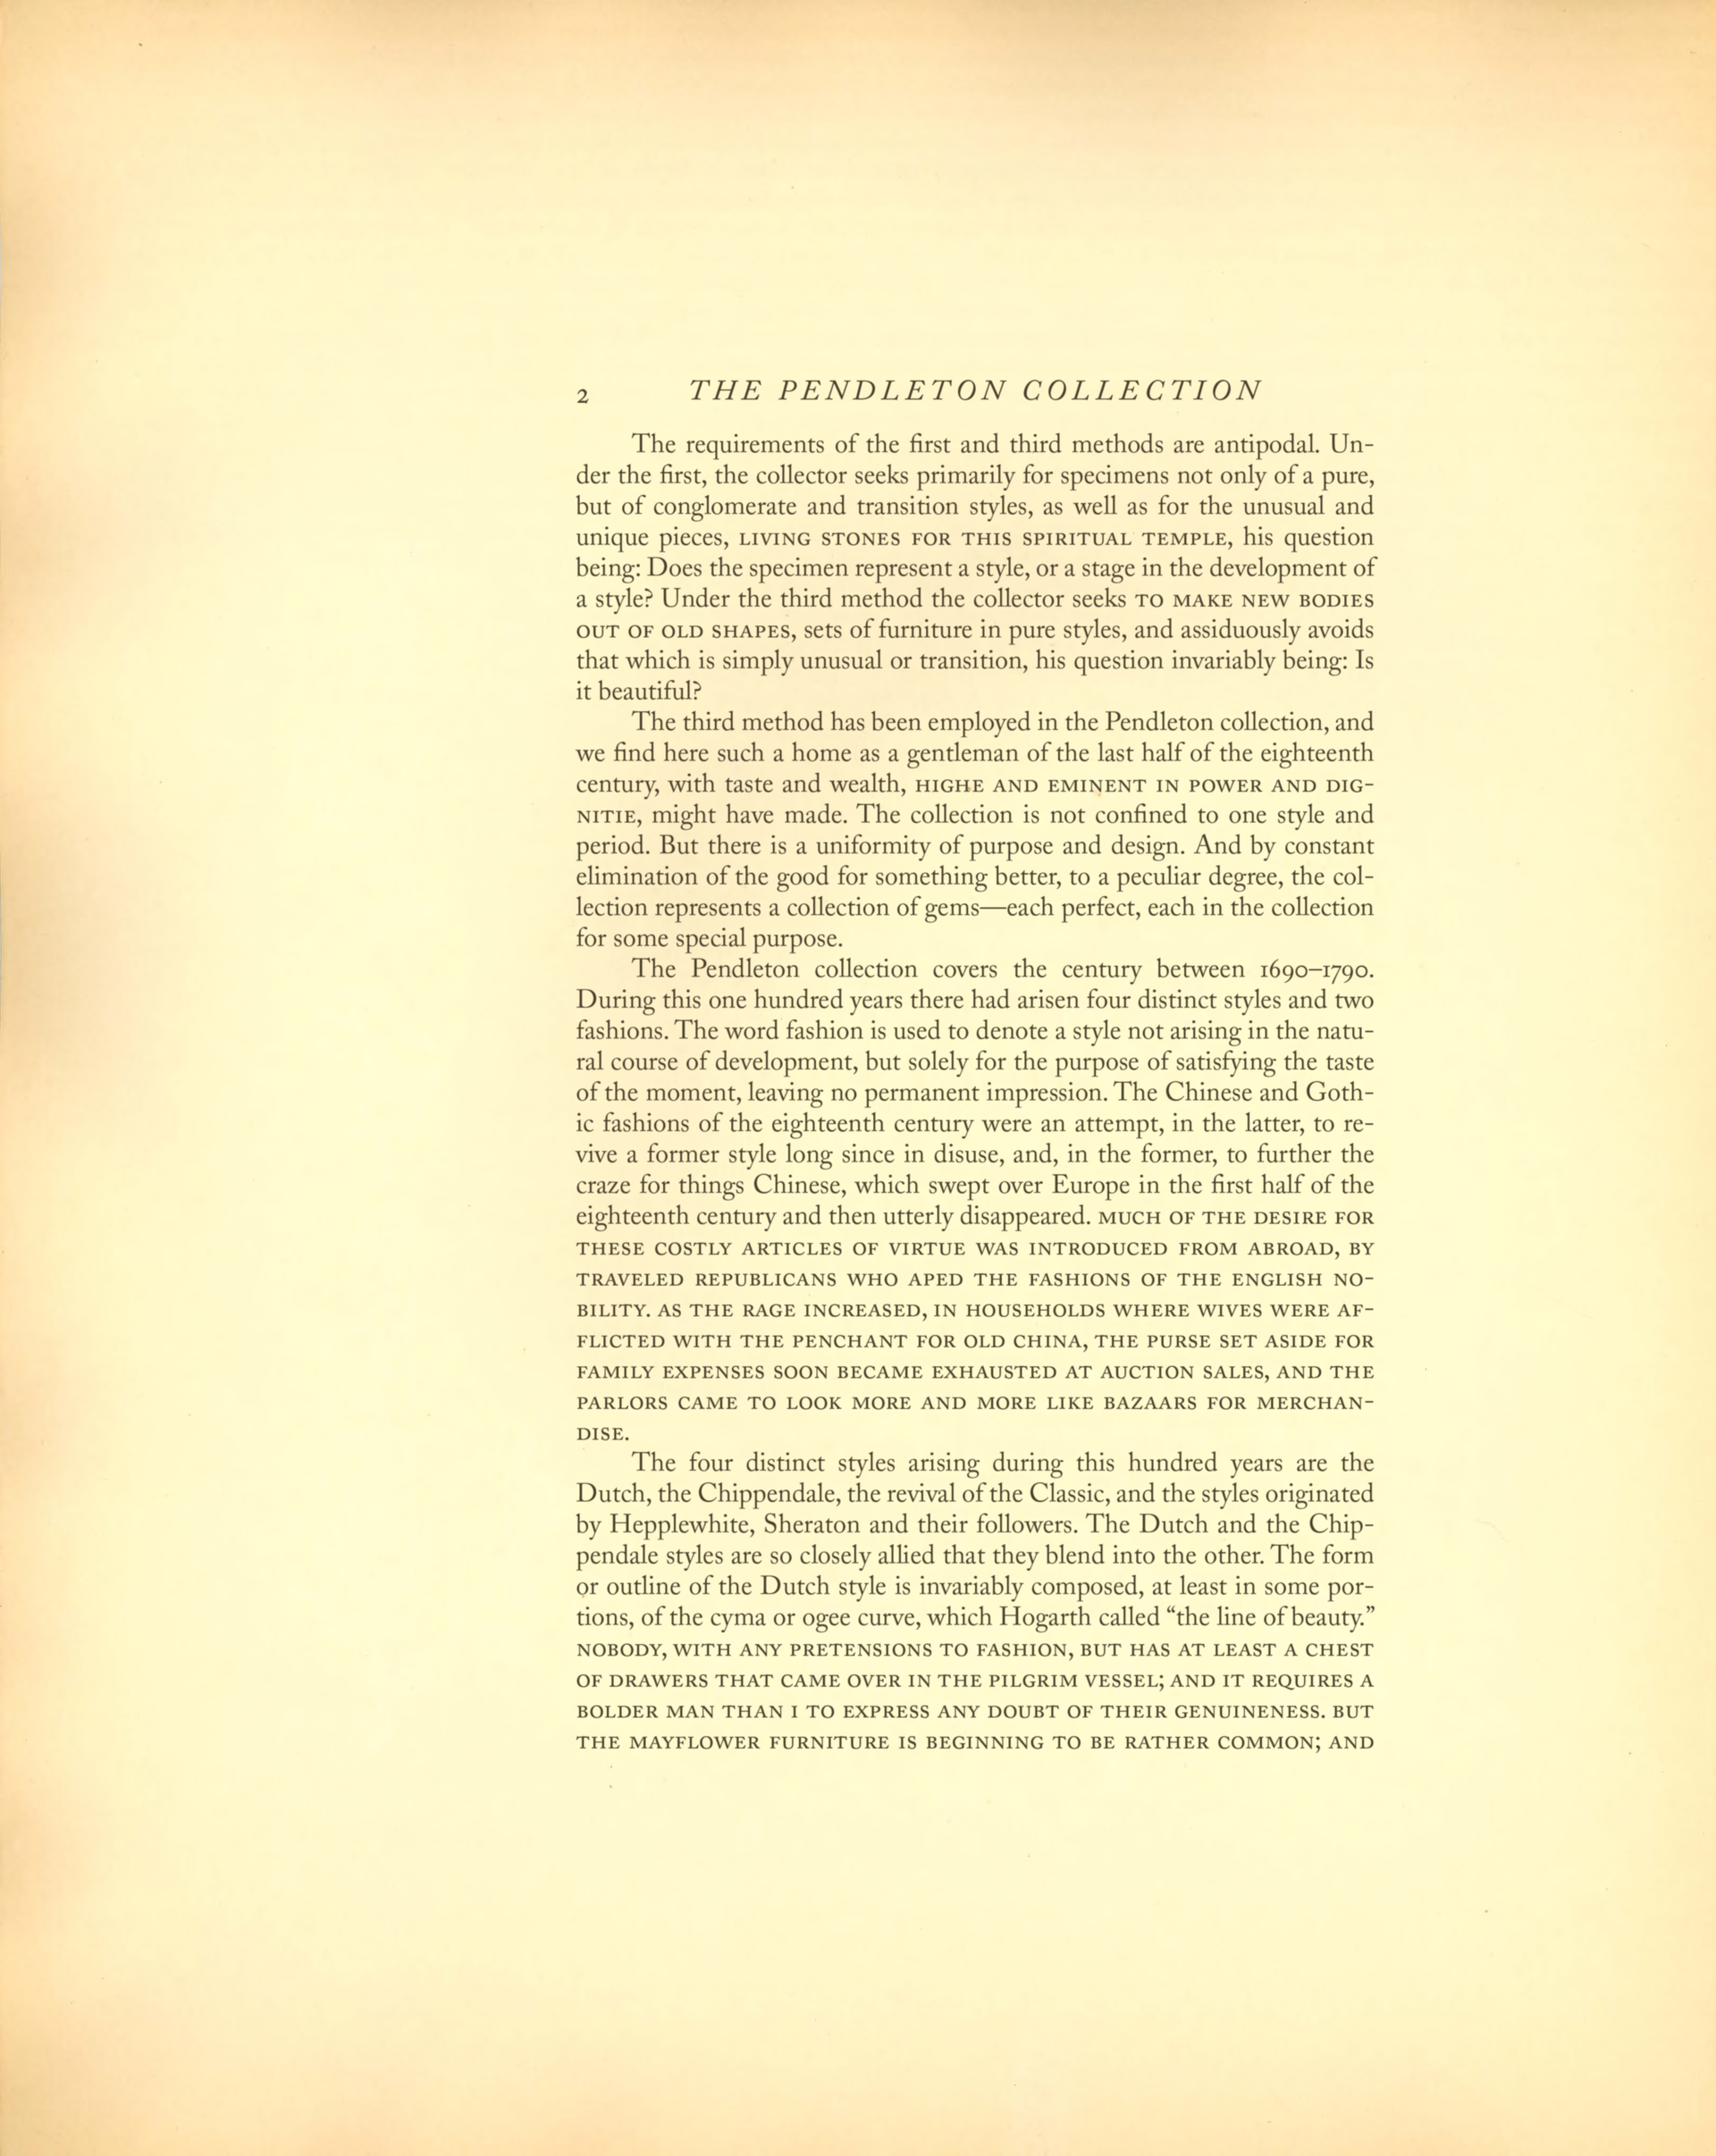 The Pendleton Collection book: Introductory text page 2